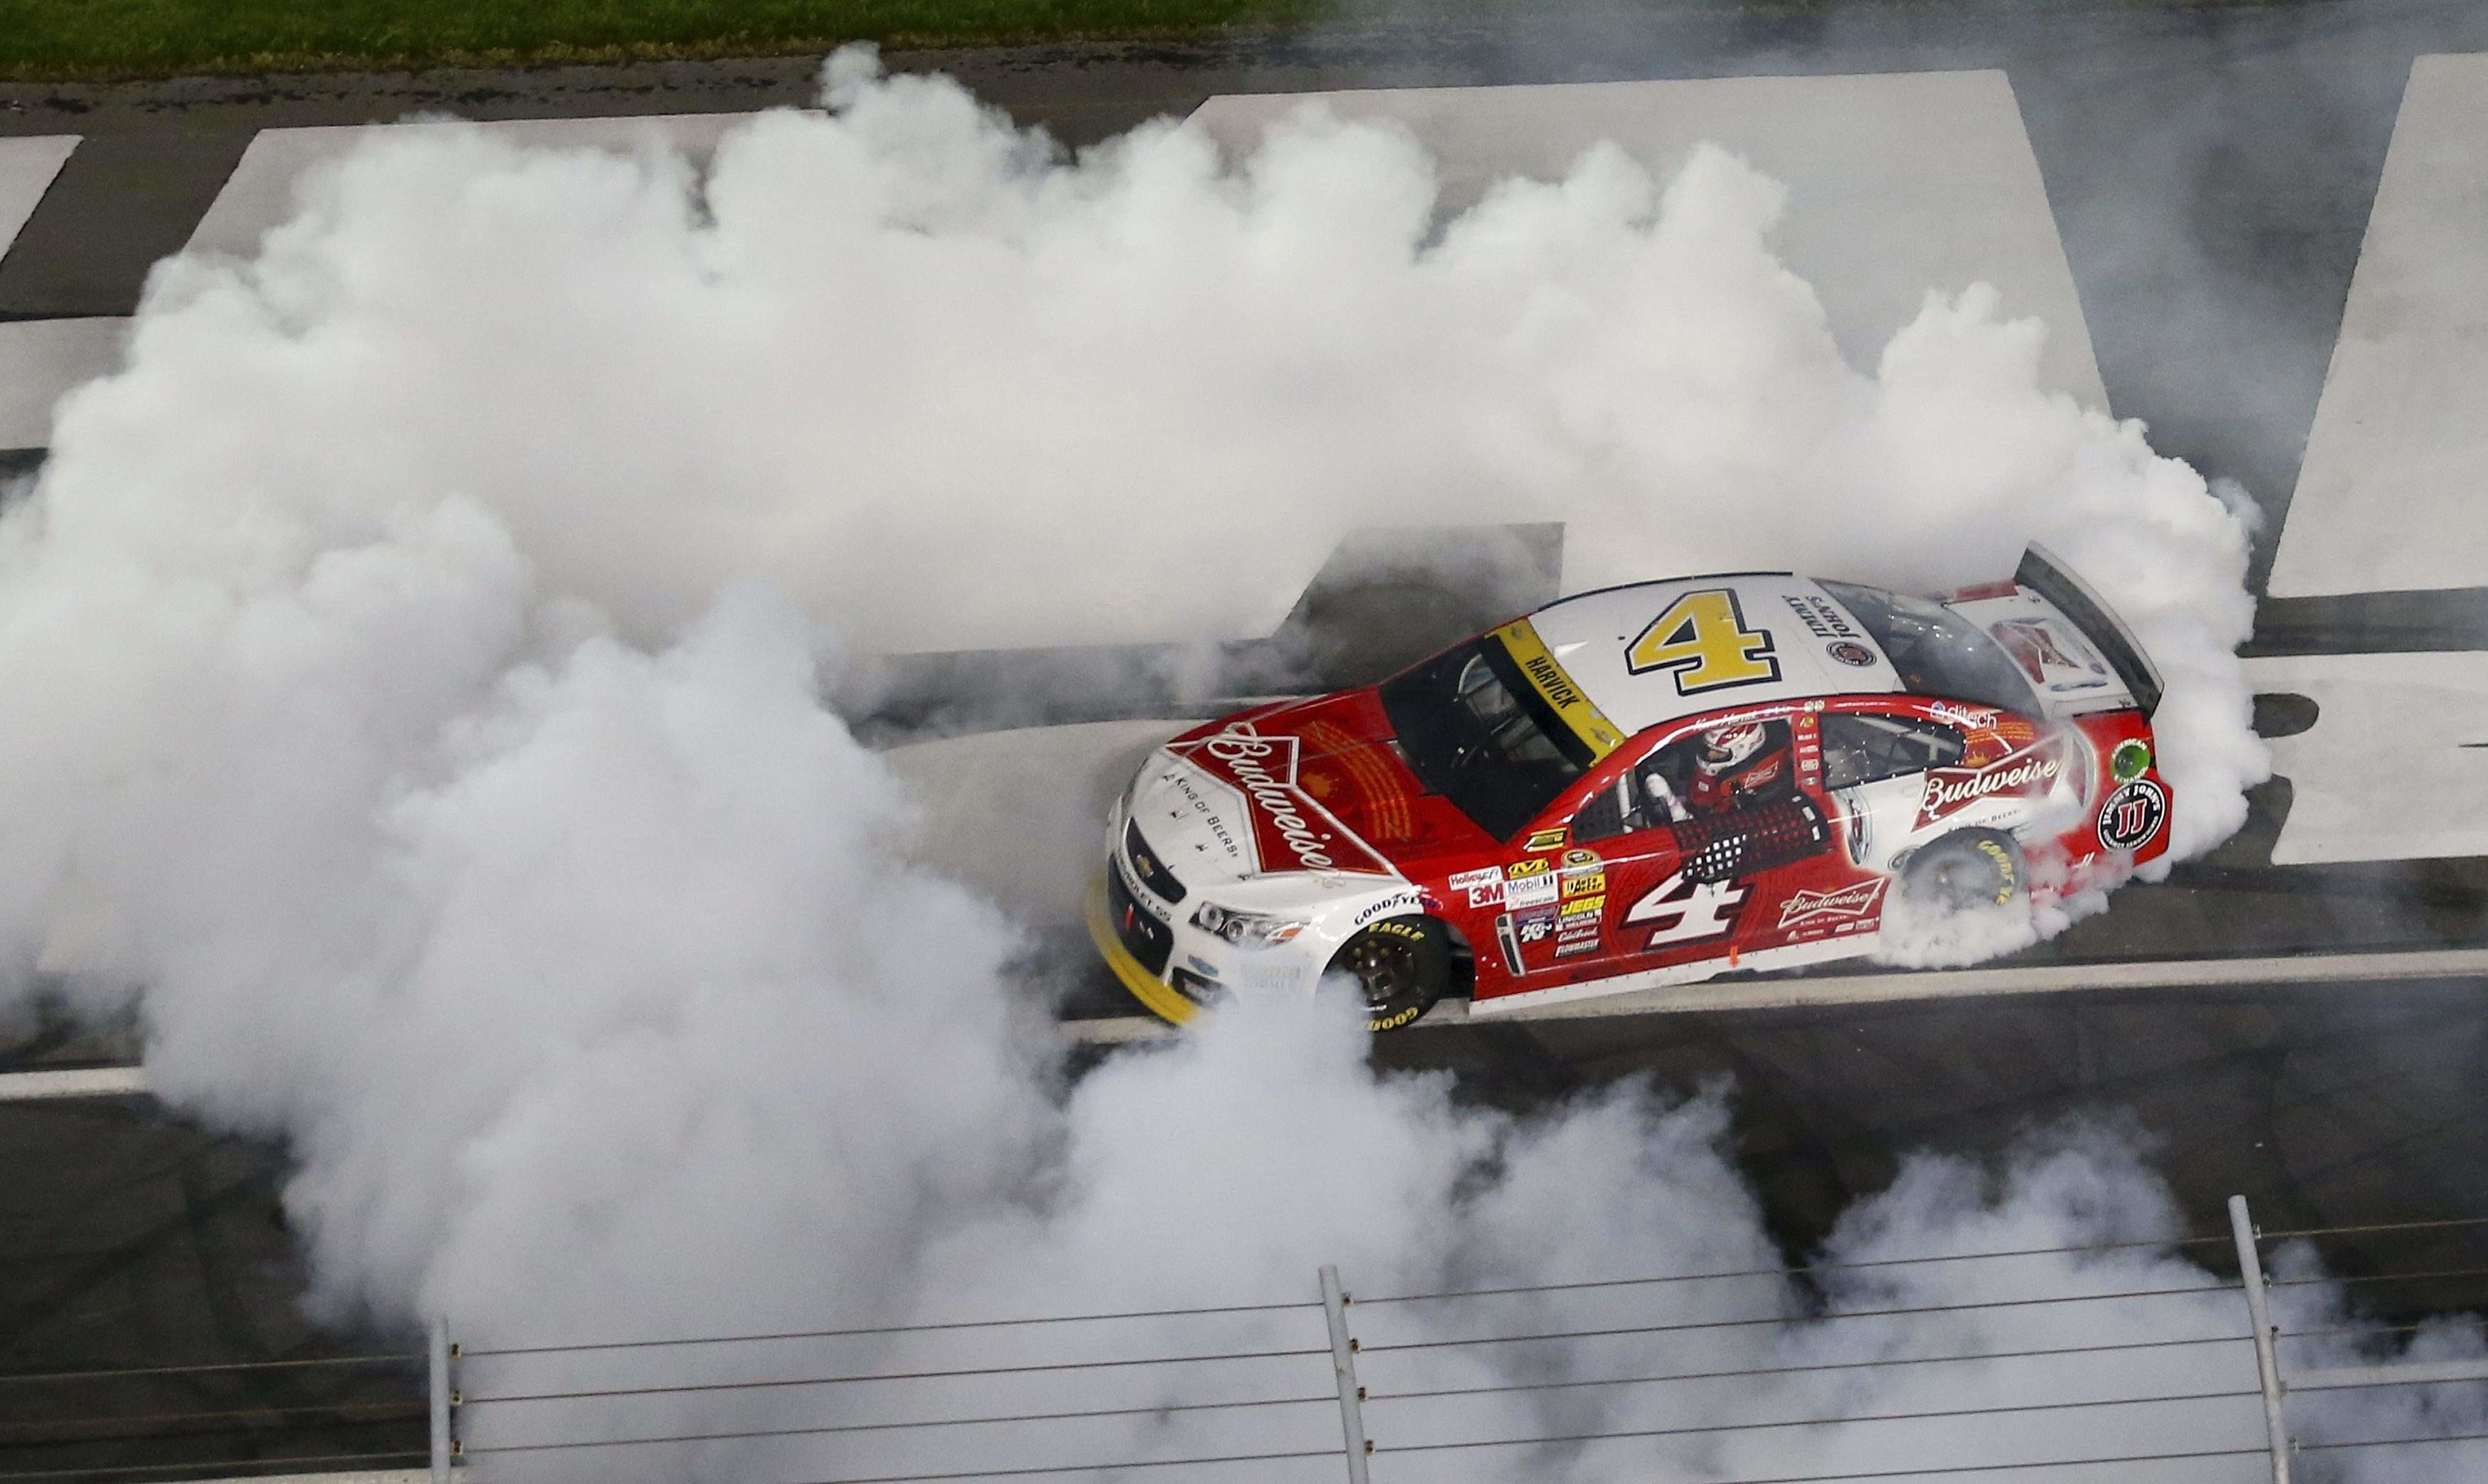 3500x2088 Harvick wins at Charlotte as tempers flare - Sports - MailTribune.com -  Medford, OR